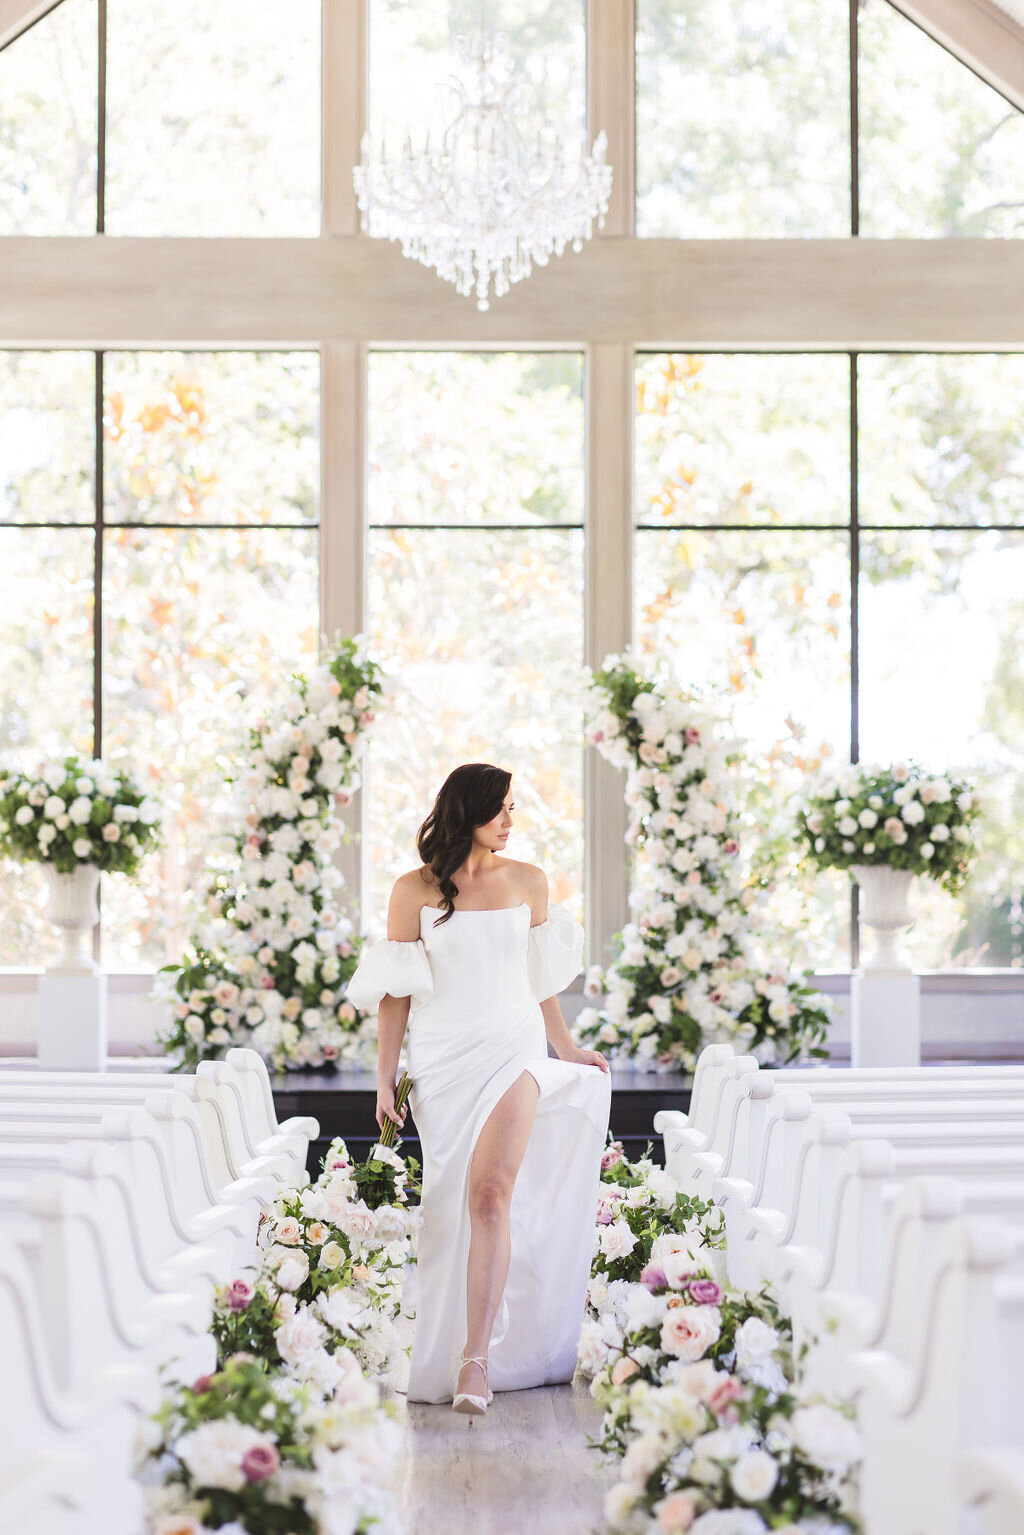 ❤️What dreams are made of!!! Best day ever... Make it beautiful and make it affordable too!!
ㅤ
Photography: @kmgcreativephotography
Floral: @sherpasfloralrental
ㅤ
#bridetobe #bride2024 #brideandgroom #dallasbride #texasbride #sayido #bride2025 #dfwve